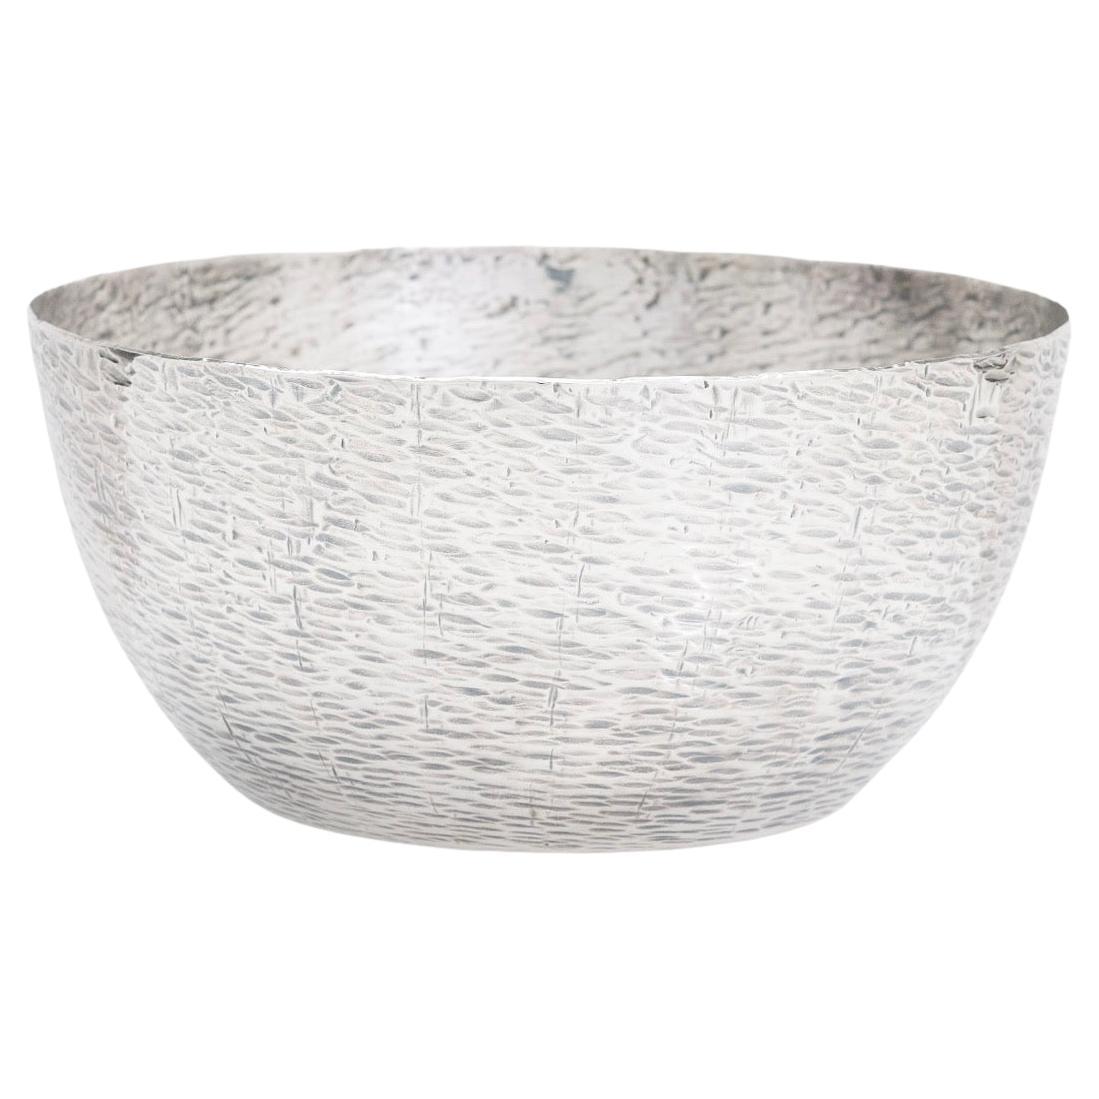 Hammered Silver Bowl by Tapio Wirkkala, TW 243, Finland, 1971, Decorative Bowl For Sale